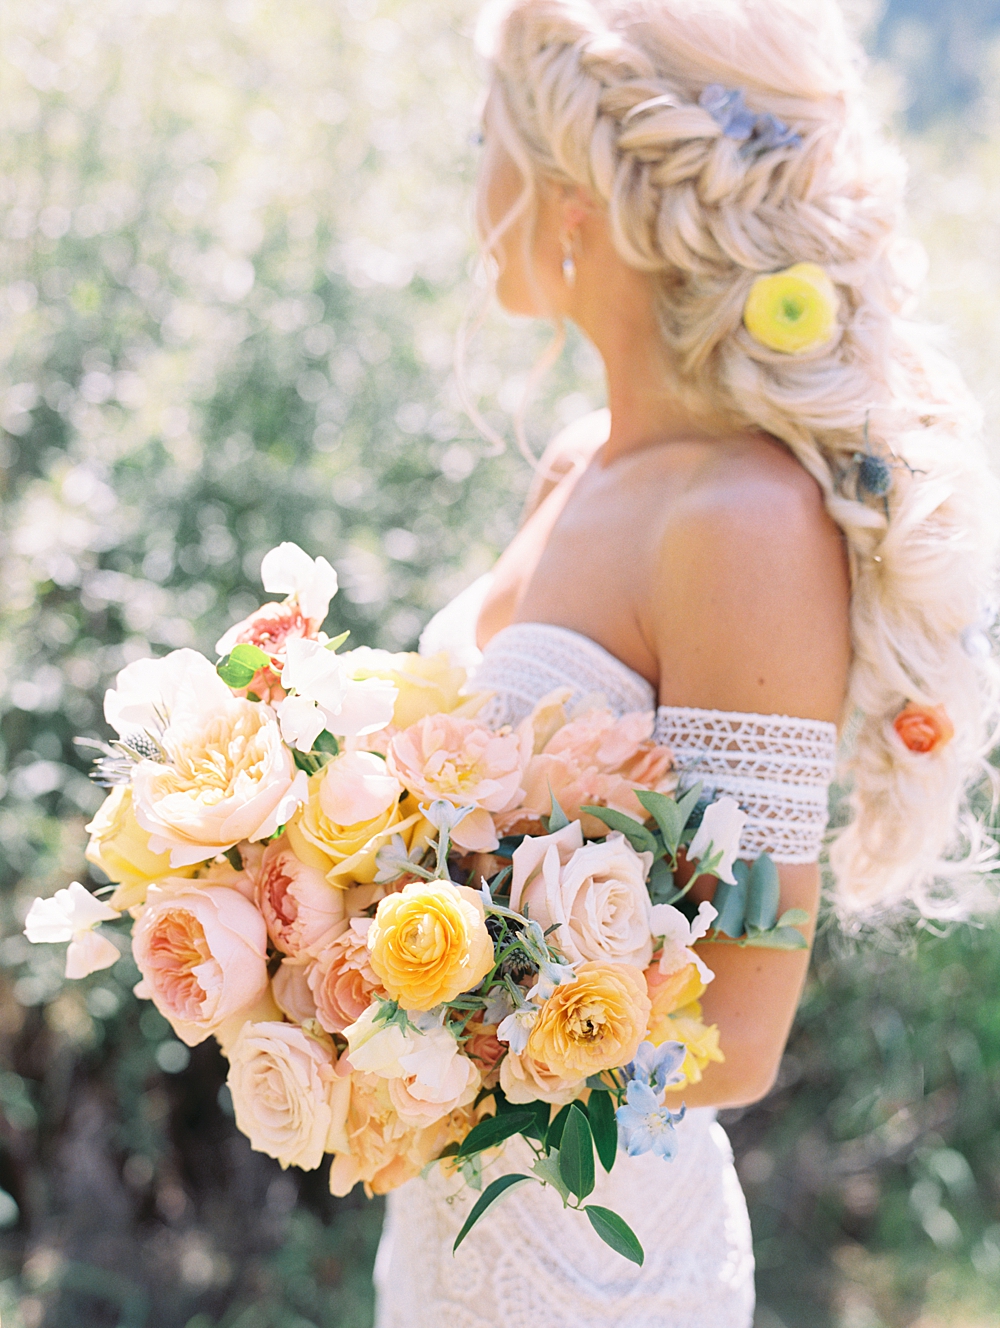 320 Ranch wedding with braided bridal hair Elsa Frozen hairstyle